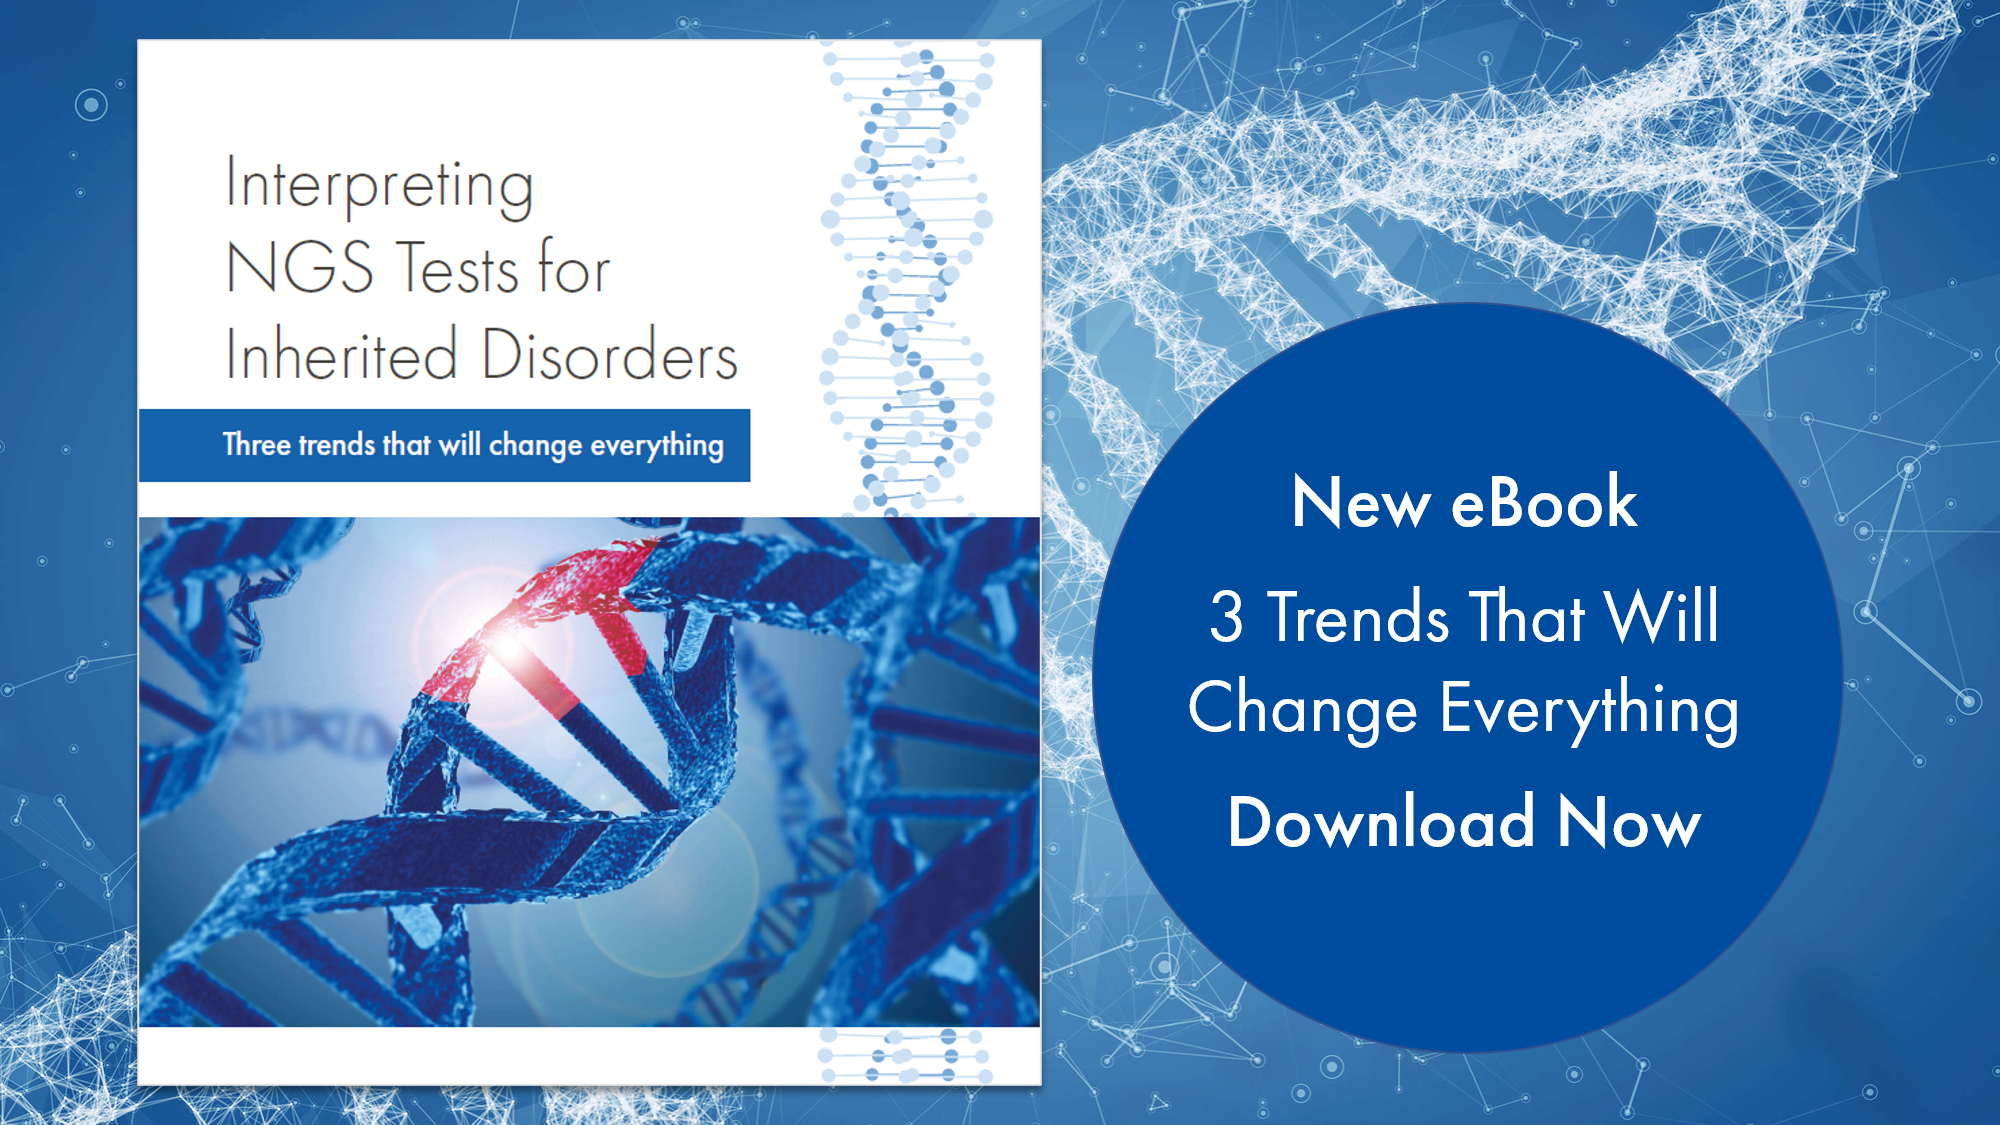 New eBook! Interpreting NGS Tests for Inherited Disorders: 3 trends that will change everything